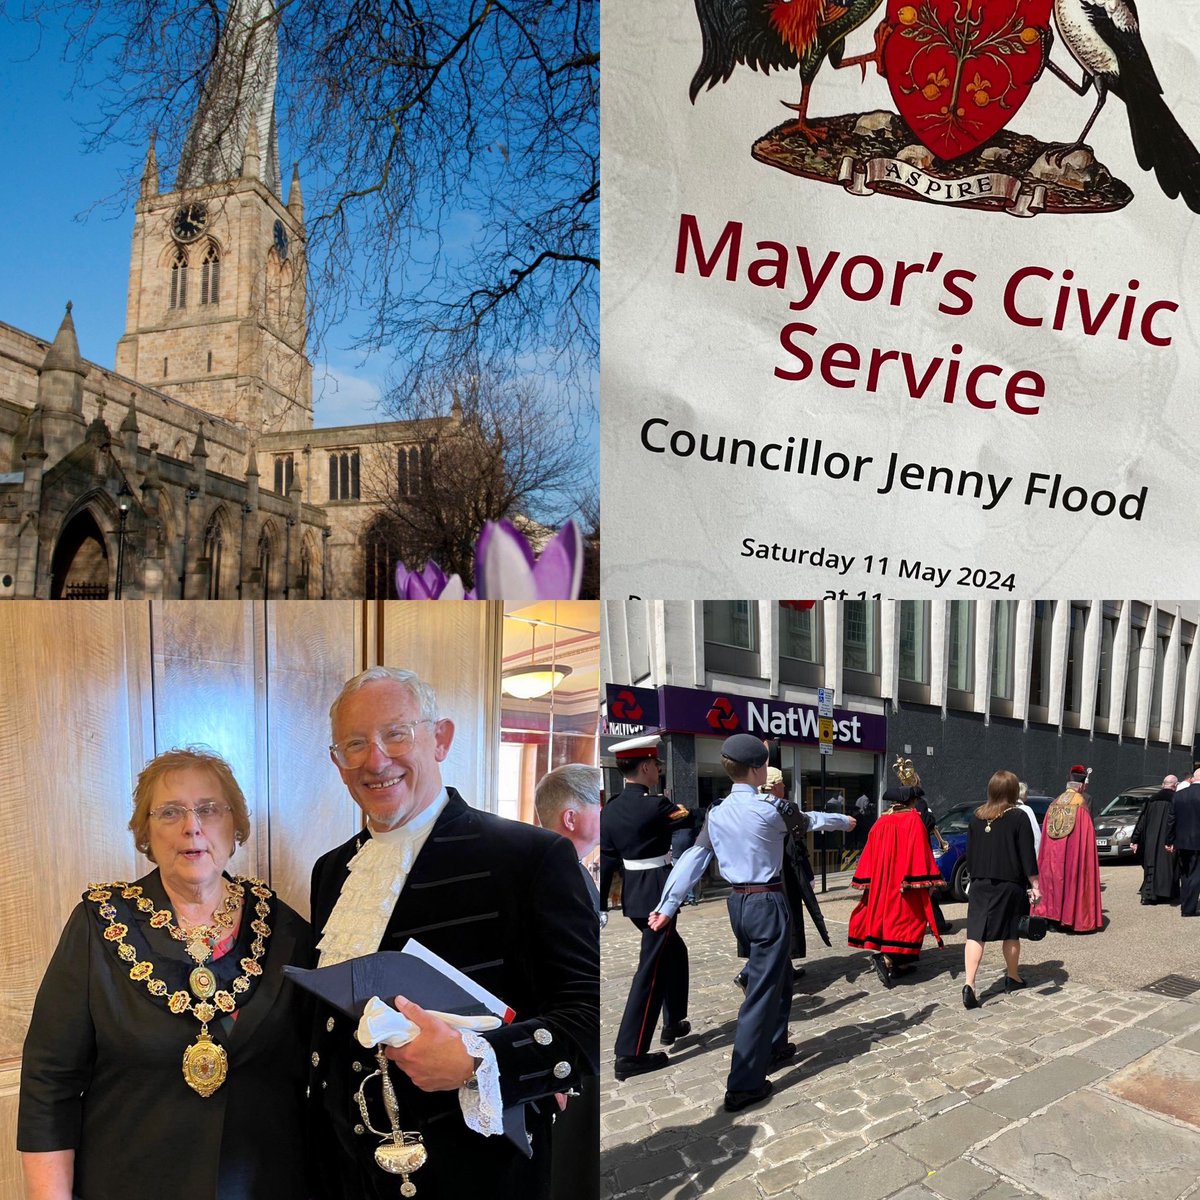 The Mayor of Chesterfield, Cllr Jenny Flood’s Civic Service was a magnificent occasion. We processed through the town following a military band with cadets, scouts, guides, civic leaders, clergy and HM Vice Lord Lieutenant to a lovely service in the parish church. @LLDrbyshire